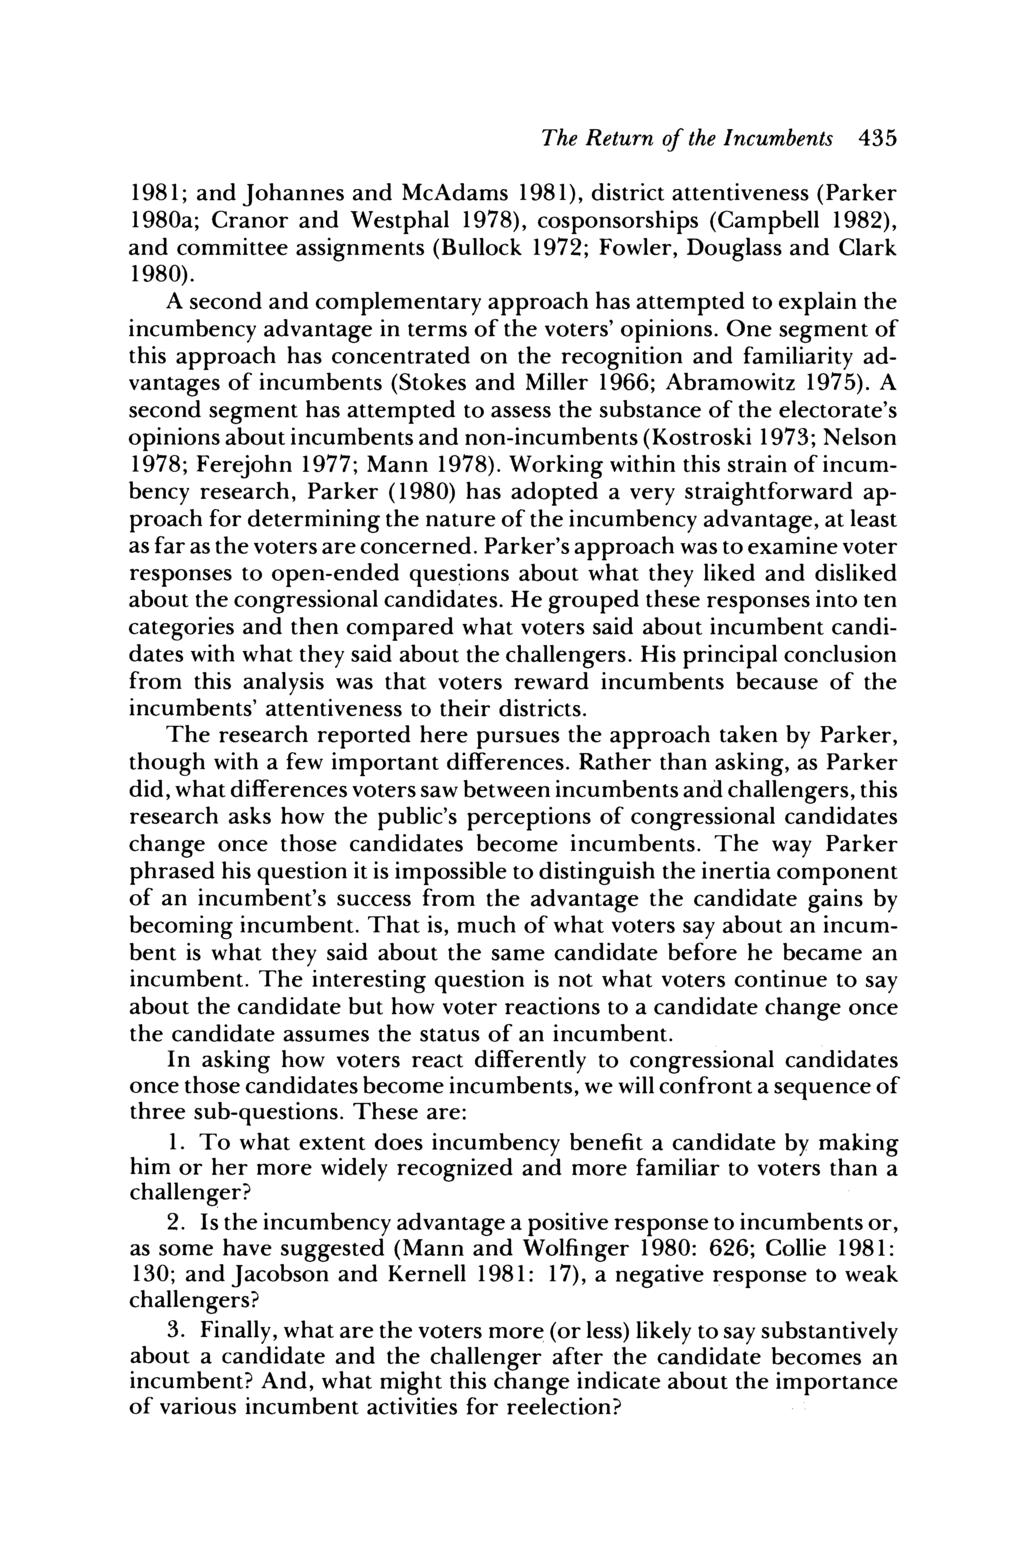 The Return of the Incumbents 435 1981; and Johannes and McAdams 1981), district attentiveness (Parker 1980a; Cranor and Westphal 1978), cosponsorships (Campbell 1982), and committee assignments